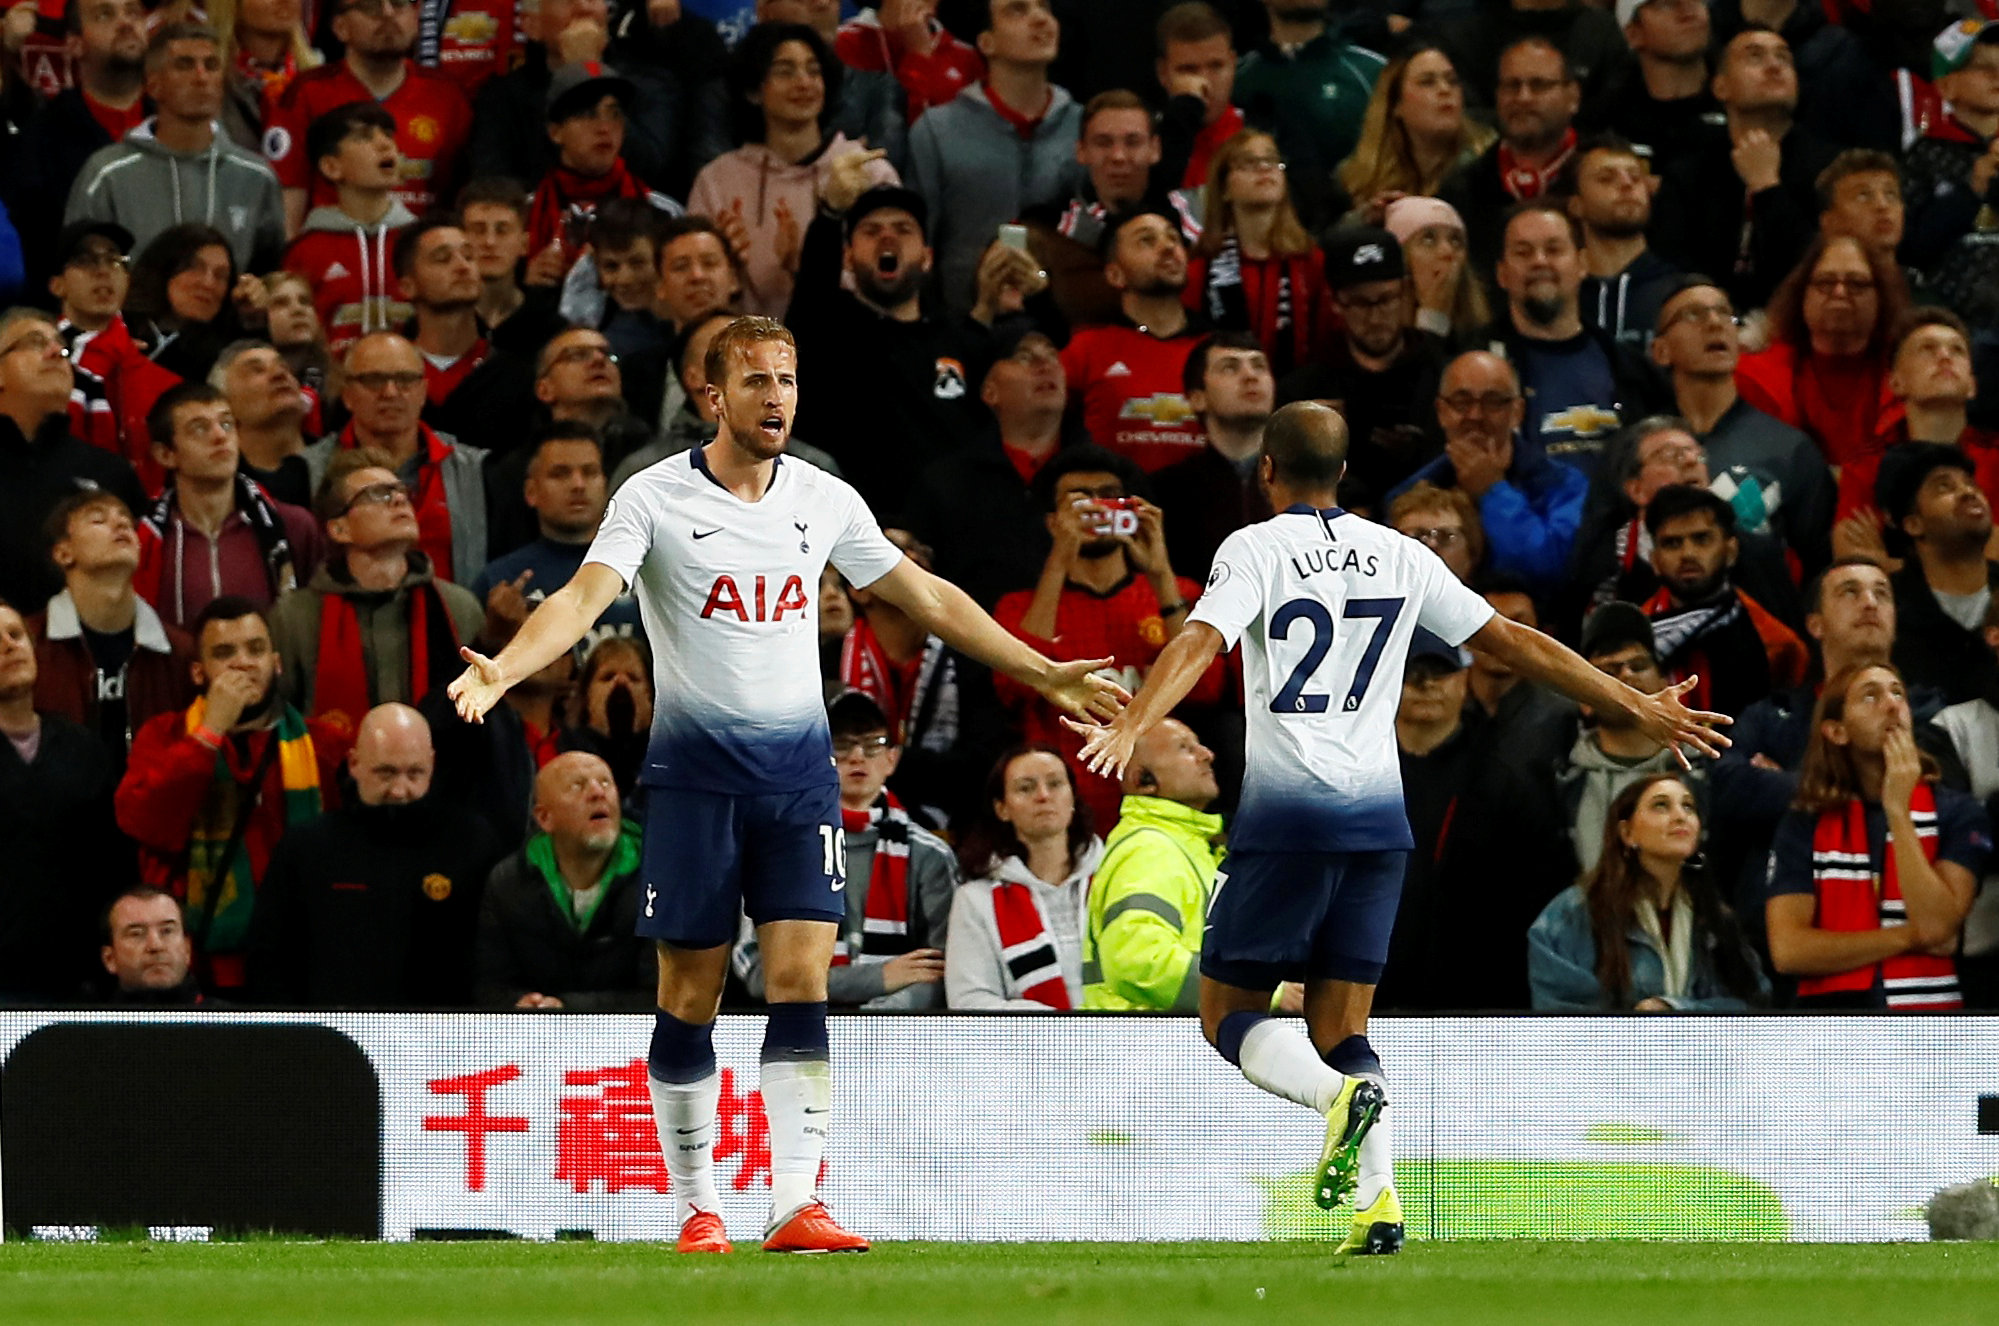 Football: Man United woes intensify as Spurs win at Old Trafford